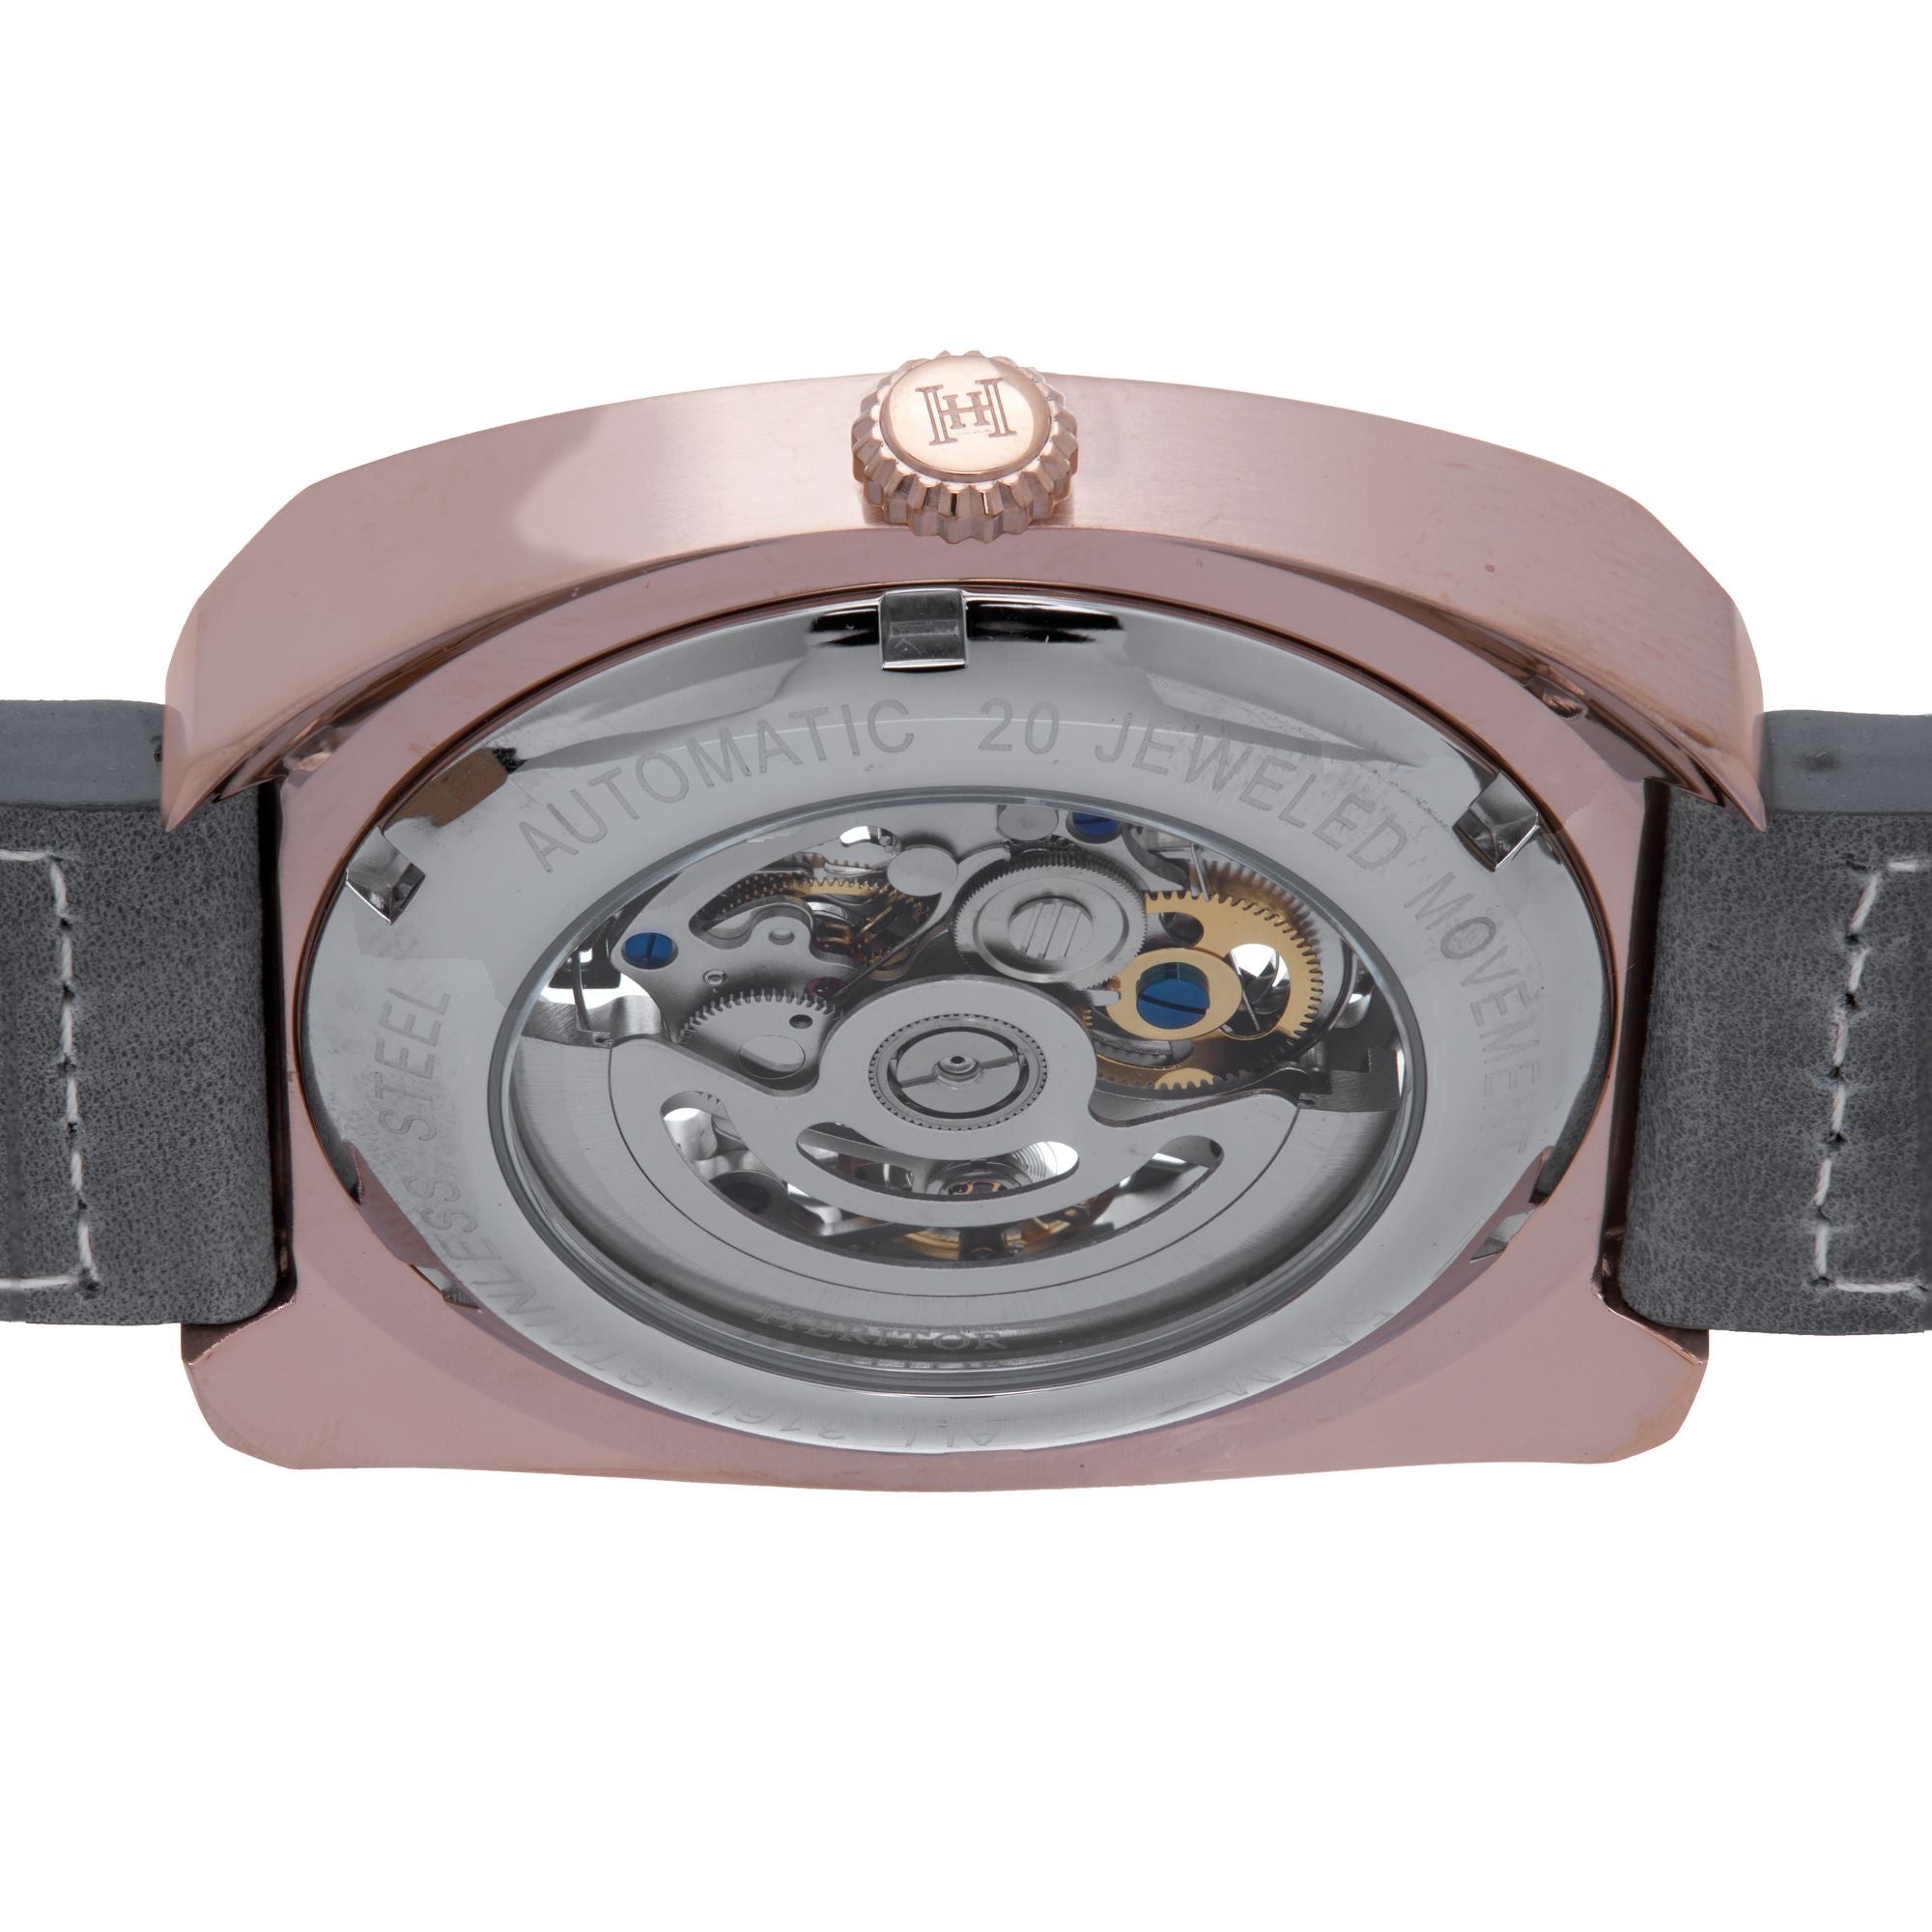 Heritor Automatic Gatling Skeletonized Leather-Band Watch - Rose Gold/Gray - HERHS2304